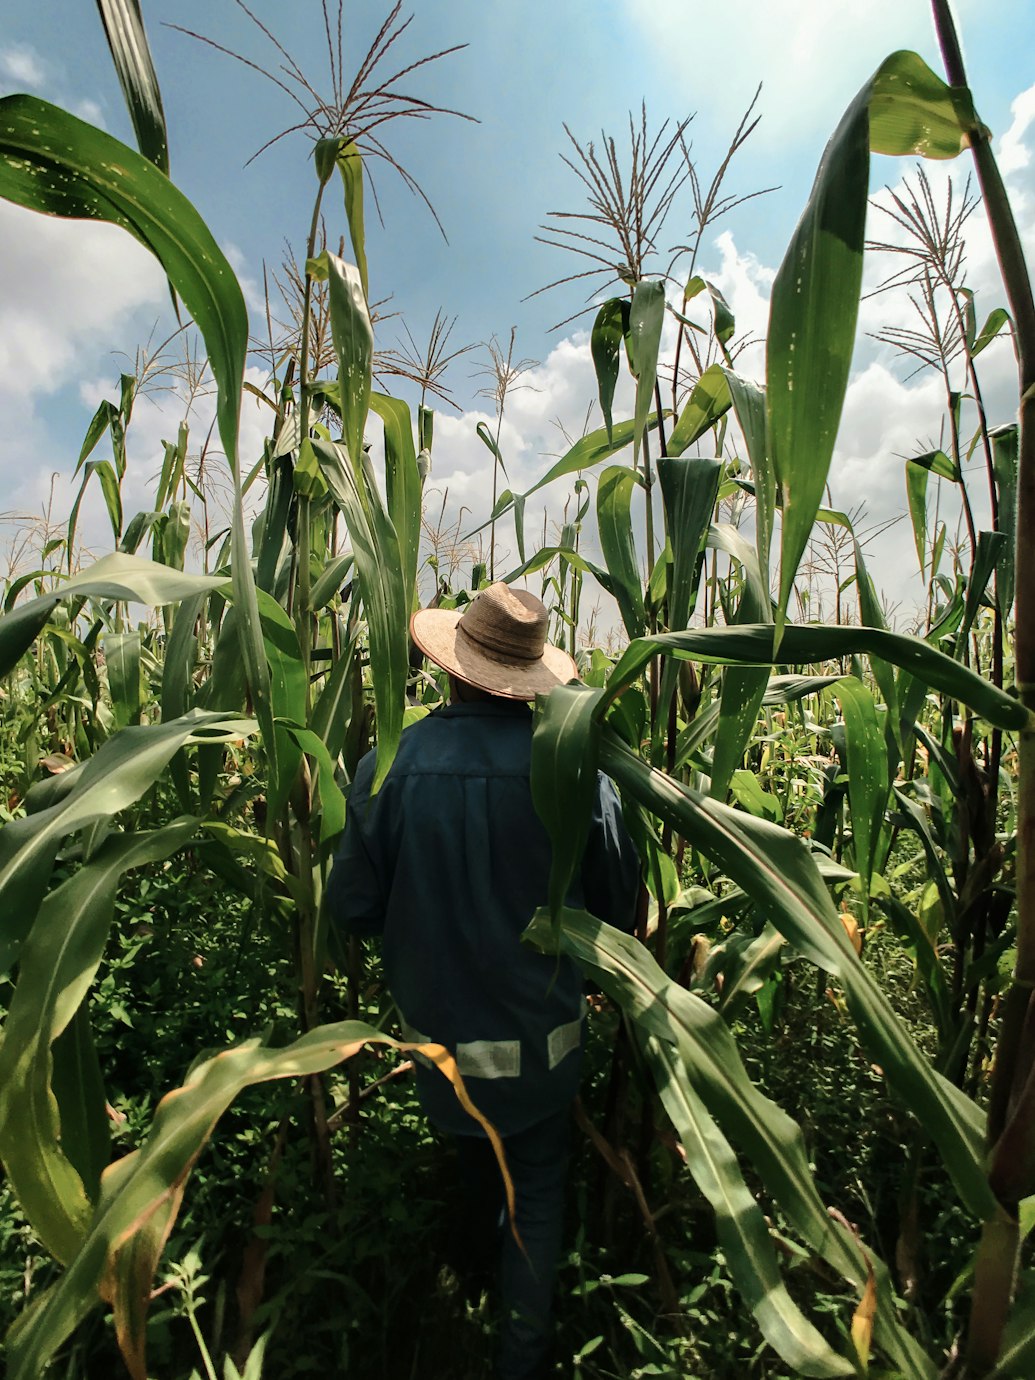 Image of a farmer in a field of maize.